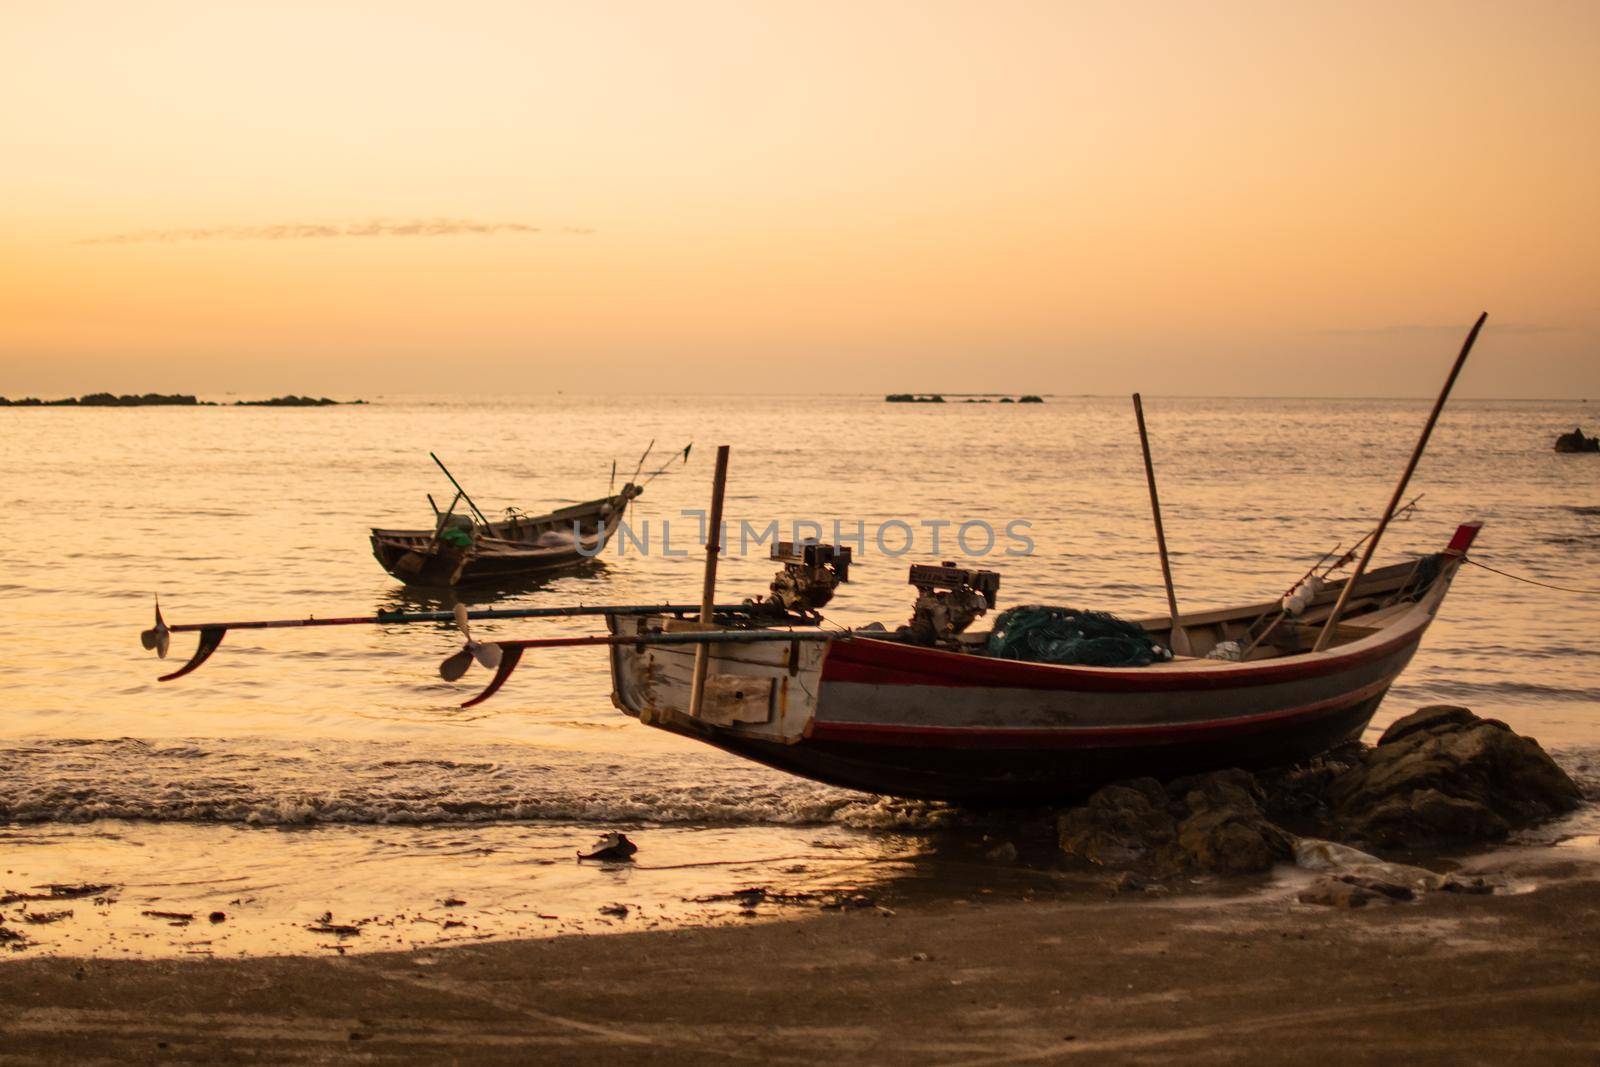 Two traditional wooden boats in a bright orange sunset, Ngwesaung, Myanmar by arvidnorberg